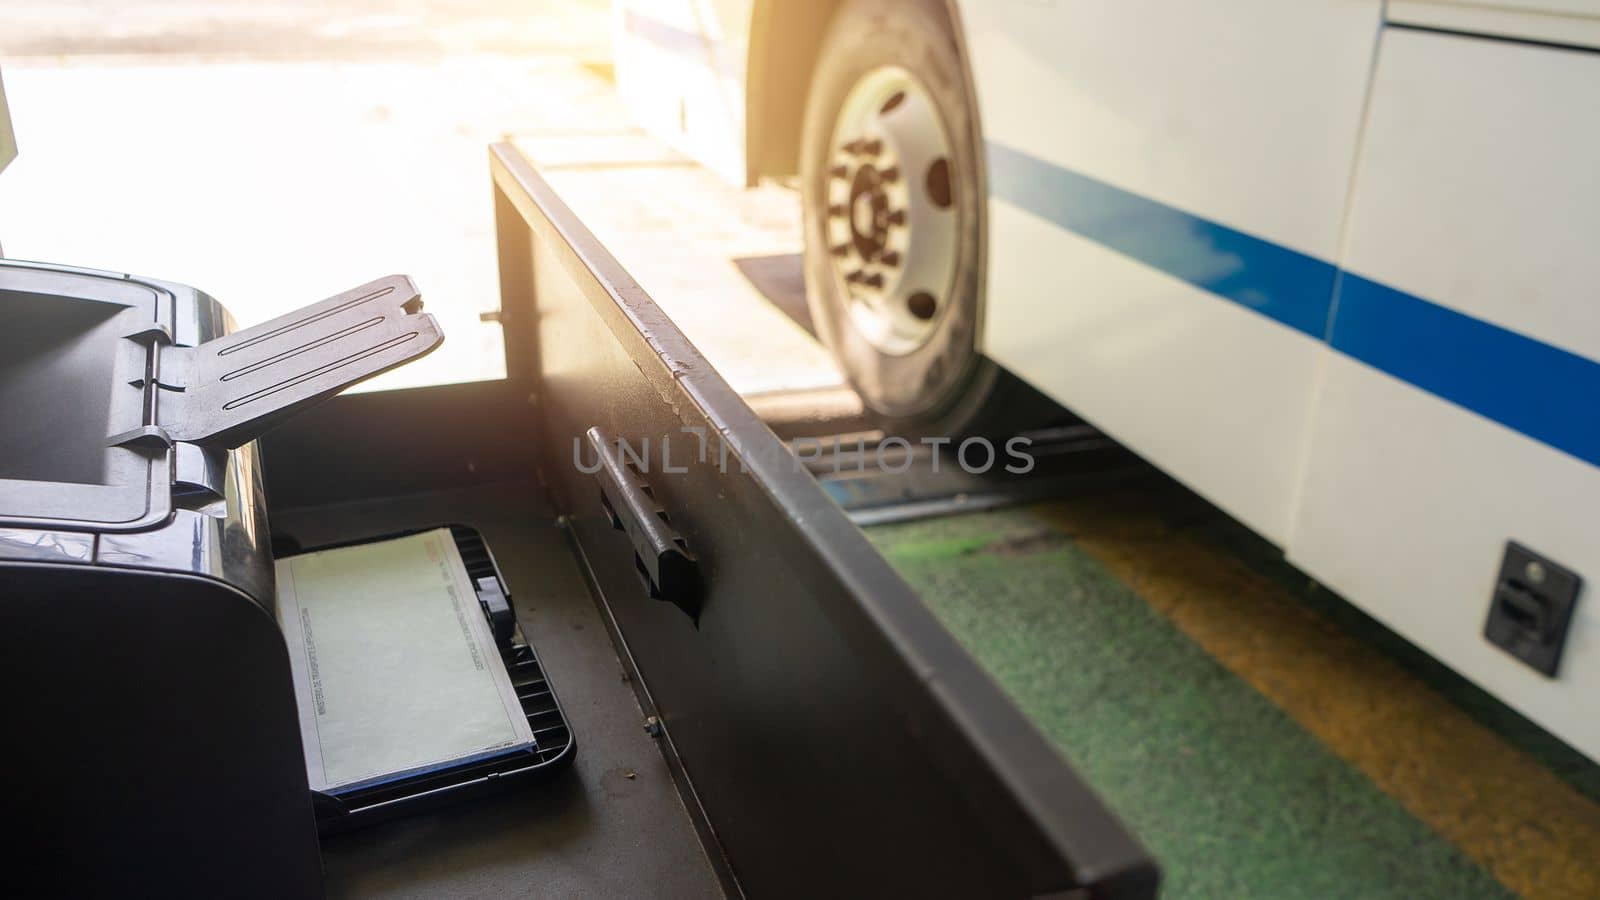 Printing certificate of mechanical inspection of a bus